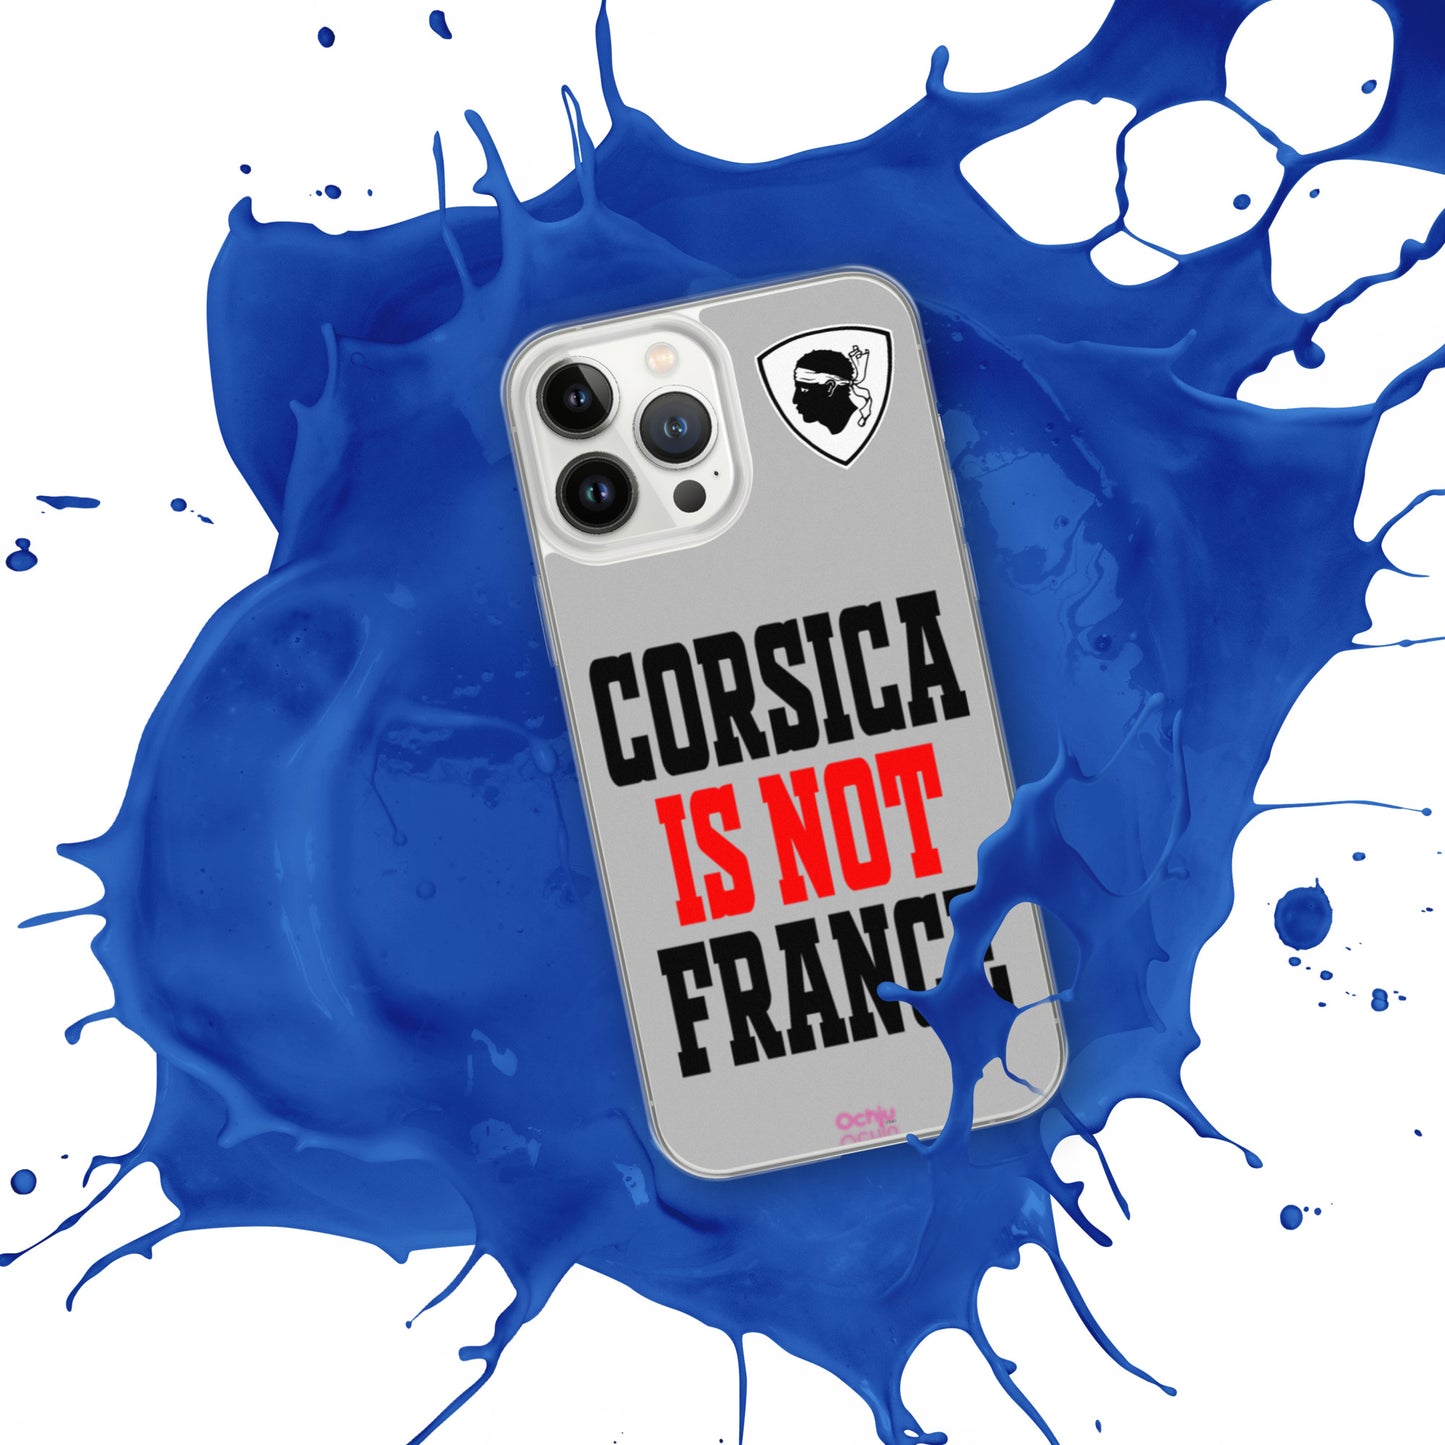 Coque pour iPhone Corsica is not France - Ochju Ochju iPhone 13 Pro Max Ochju Coque pour iPhone Corsica is not France